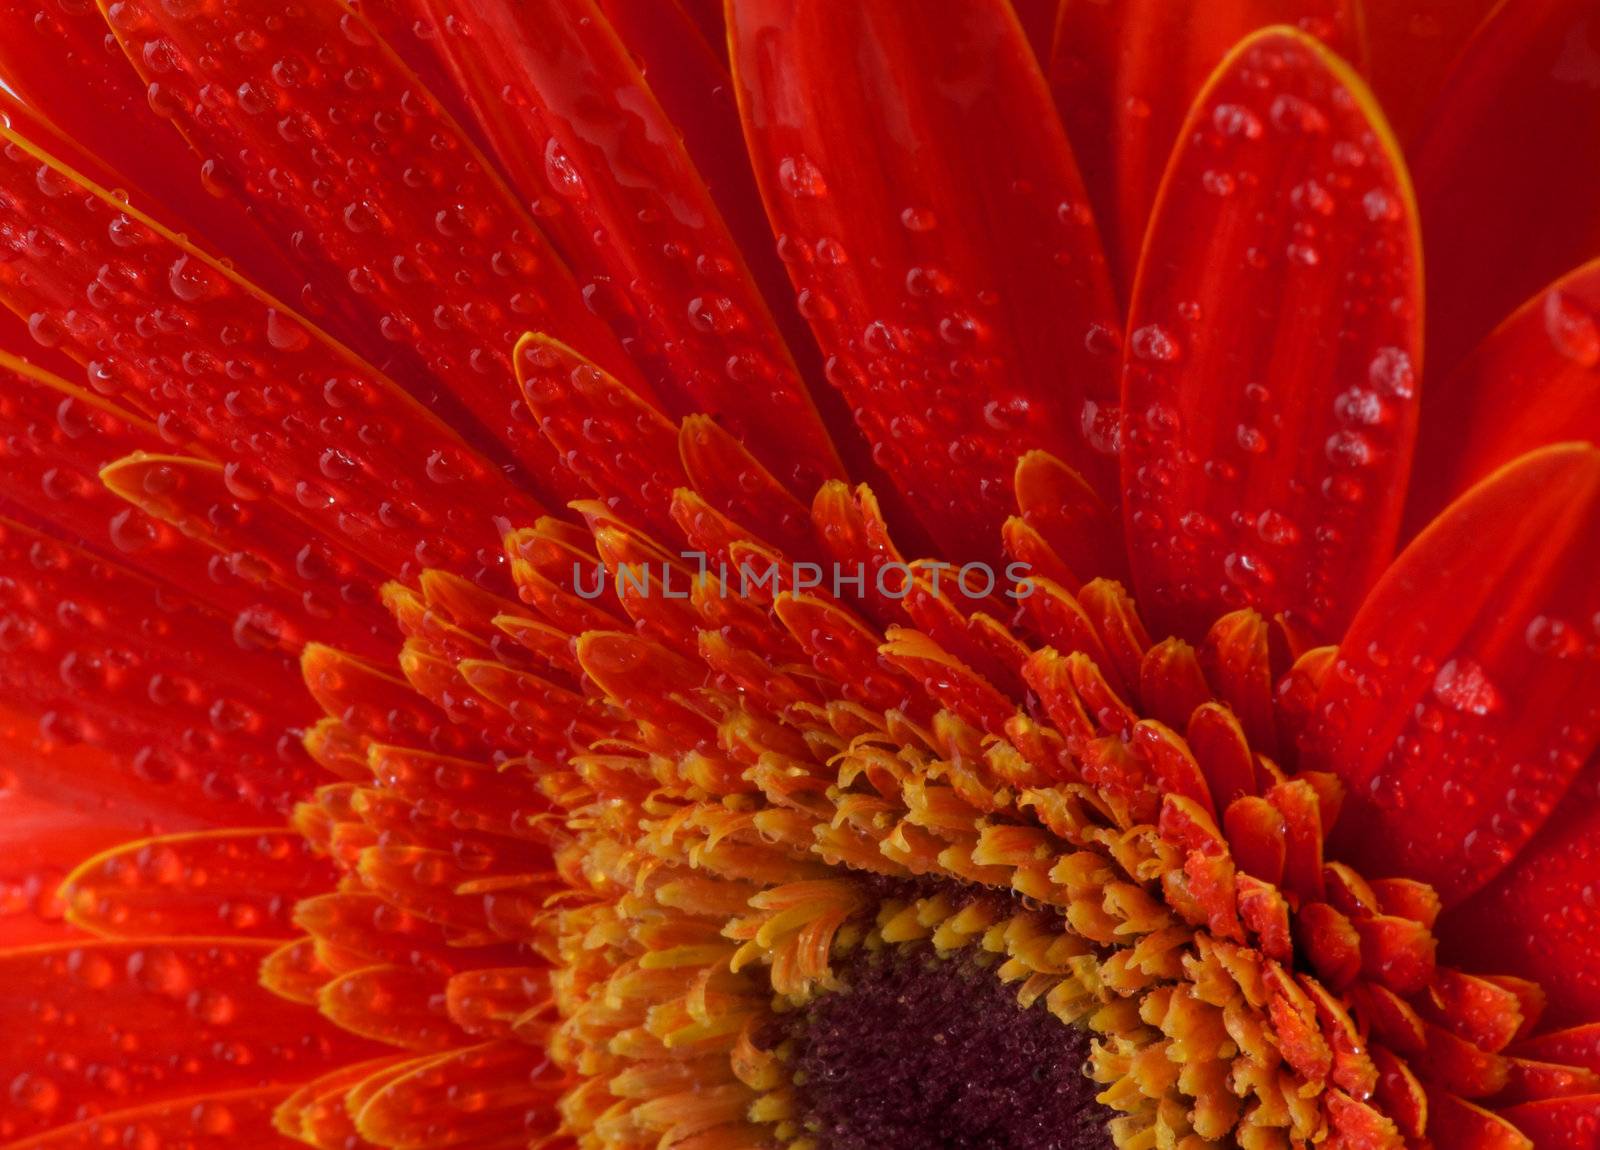 Red gerbera flower with water droplets closeup as background